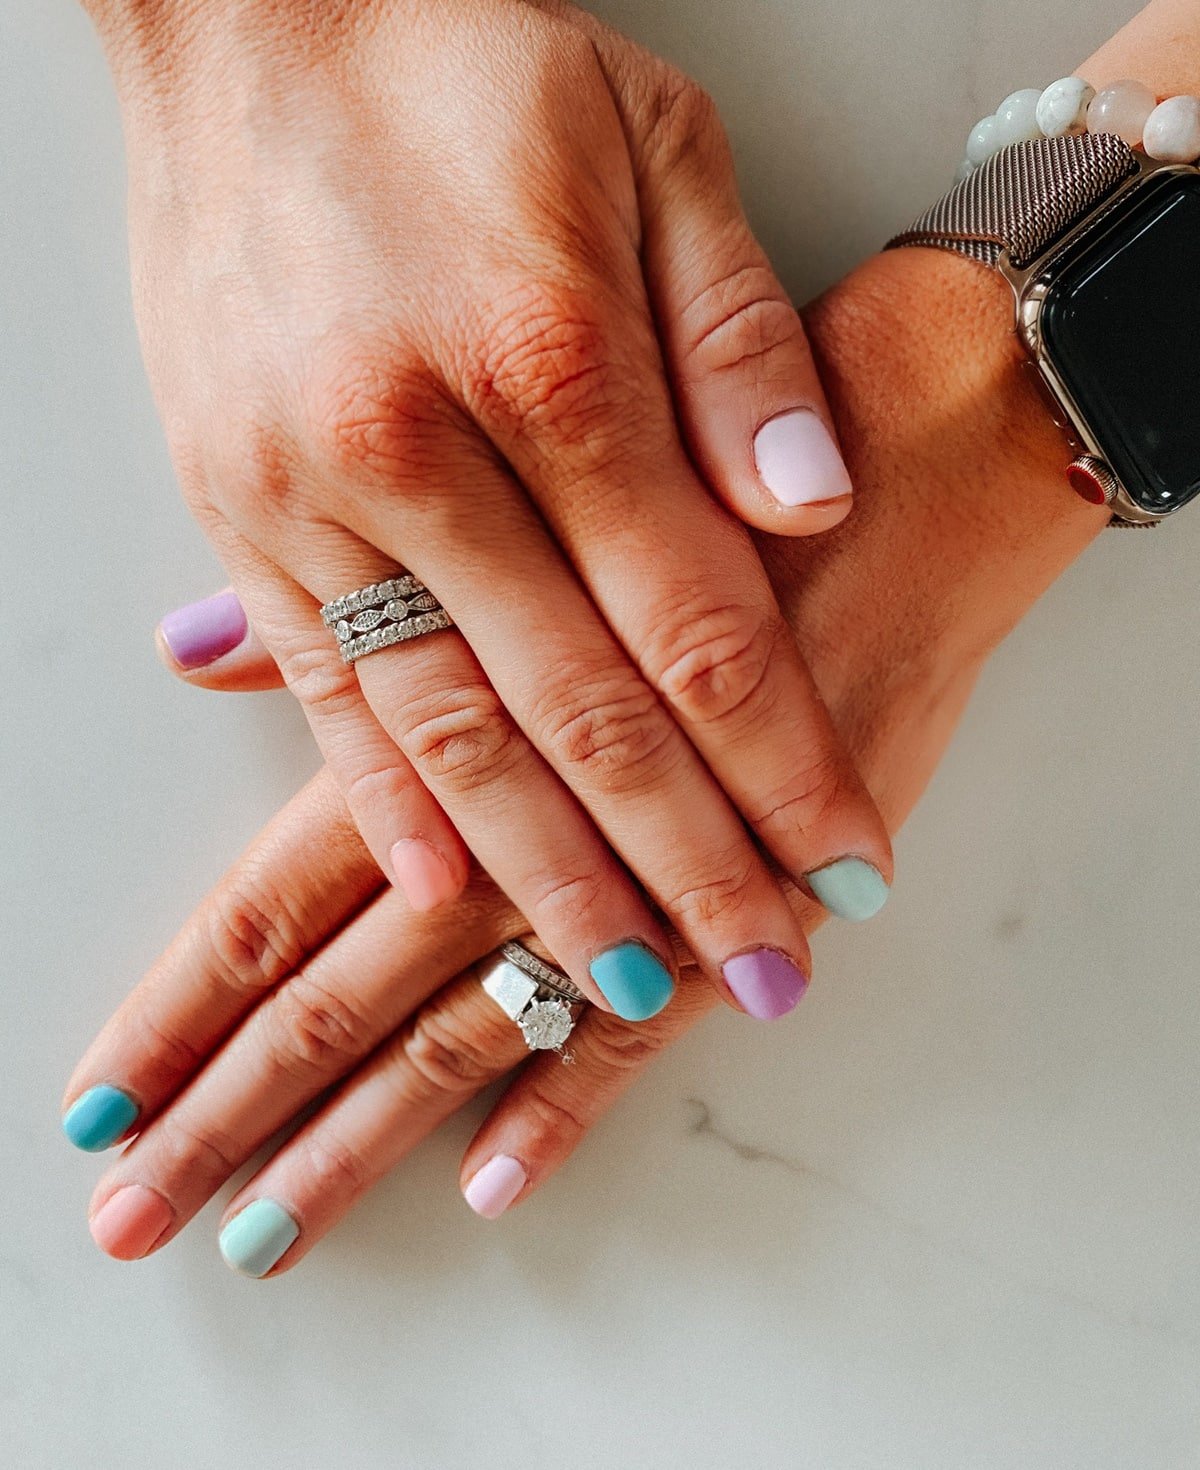 6 spring 2020 nail trends to try right now - Mint Arrow